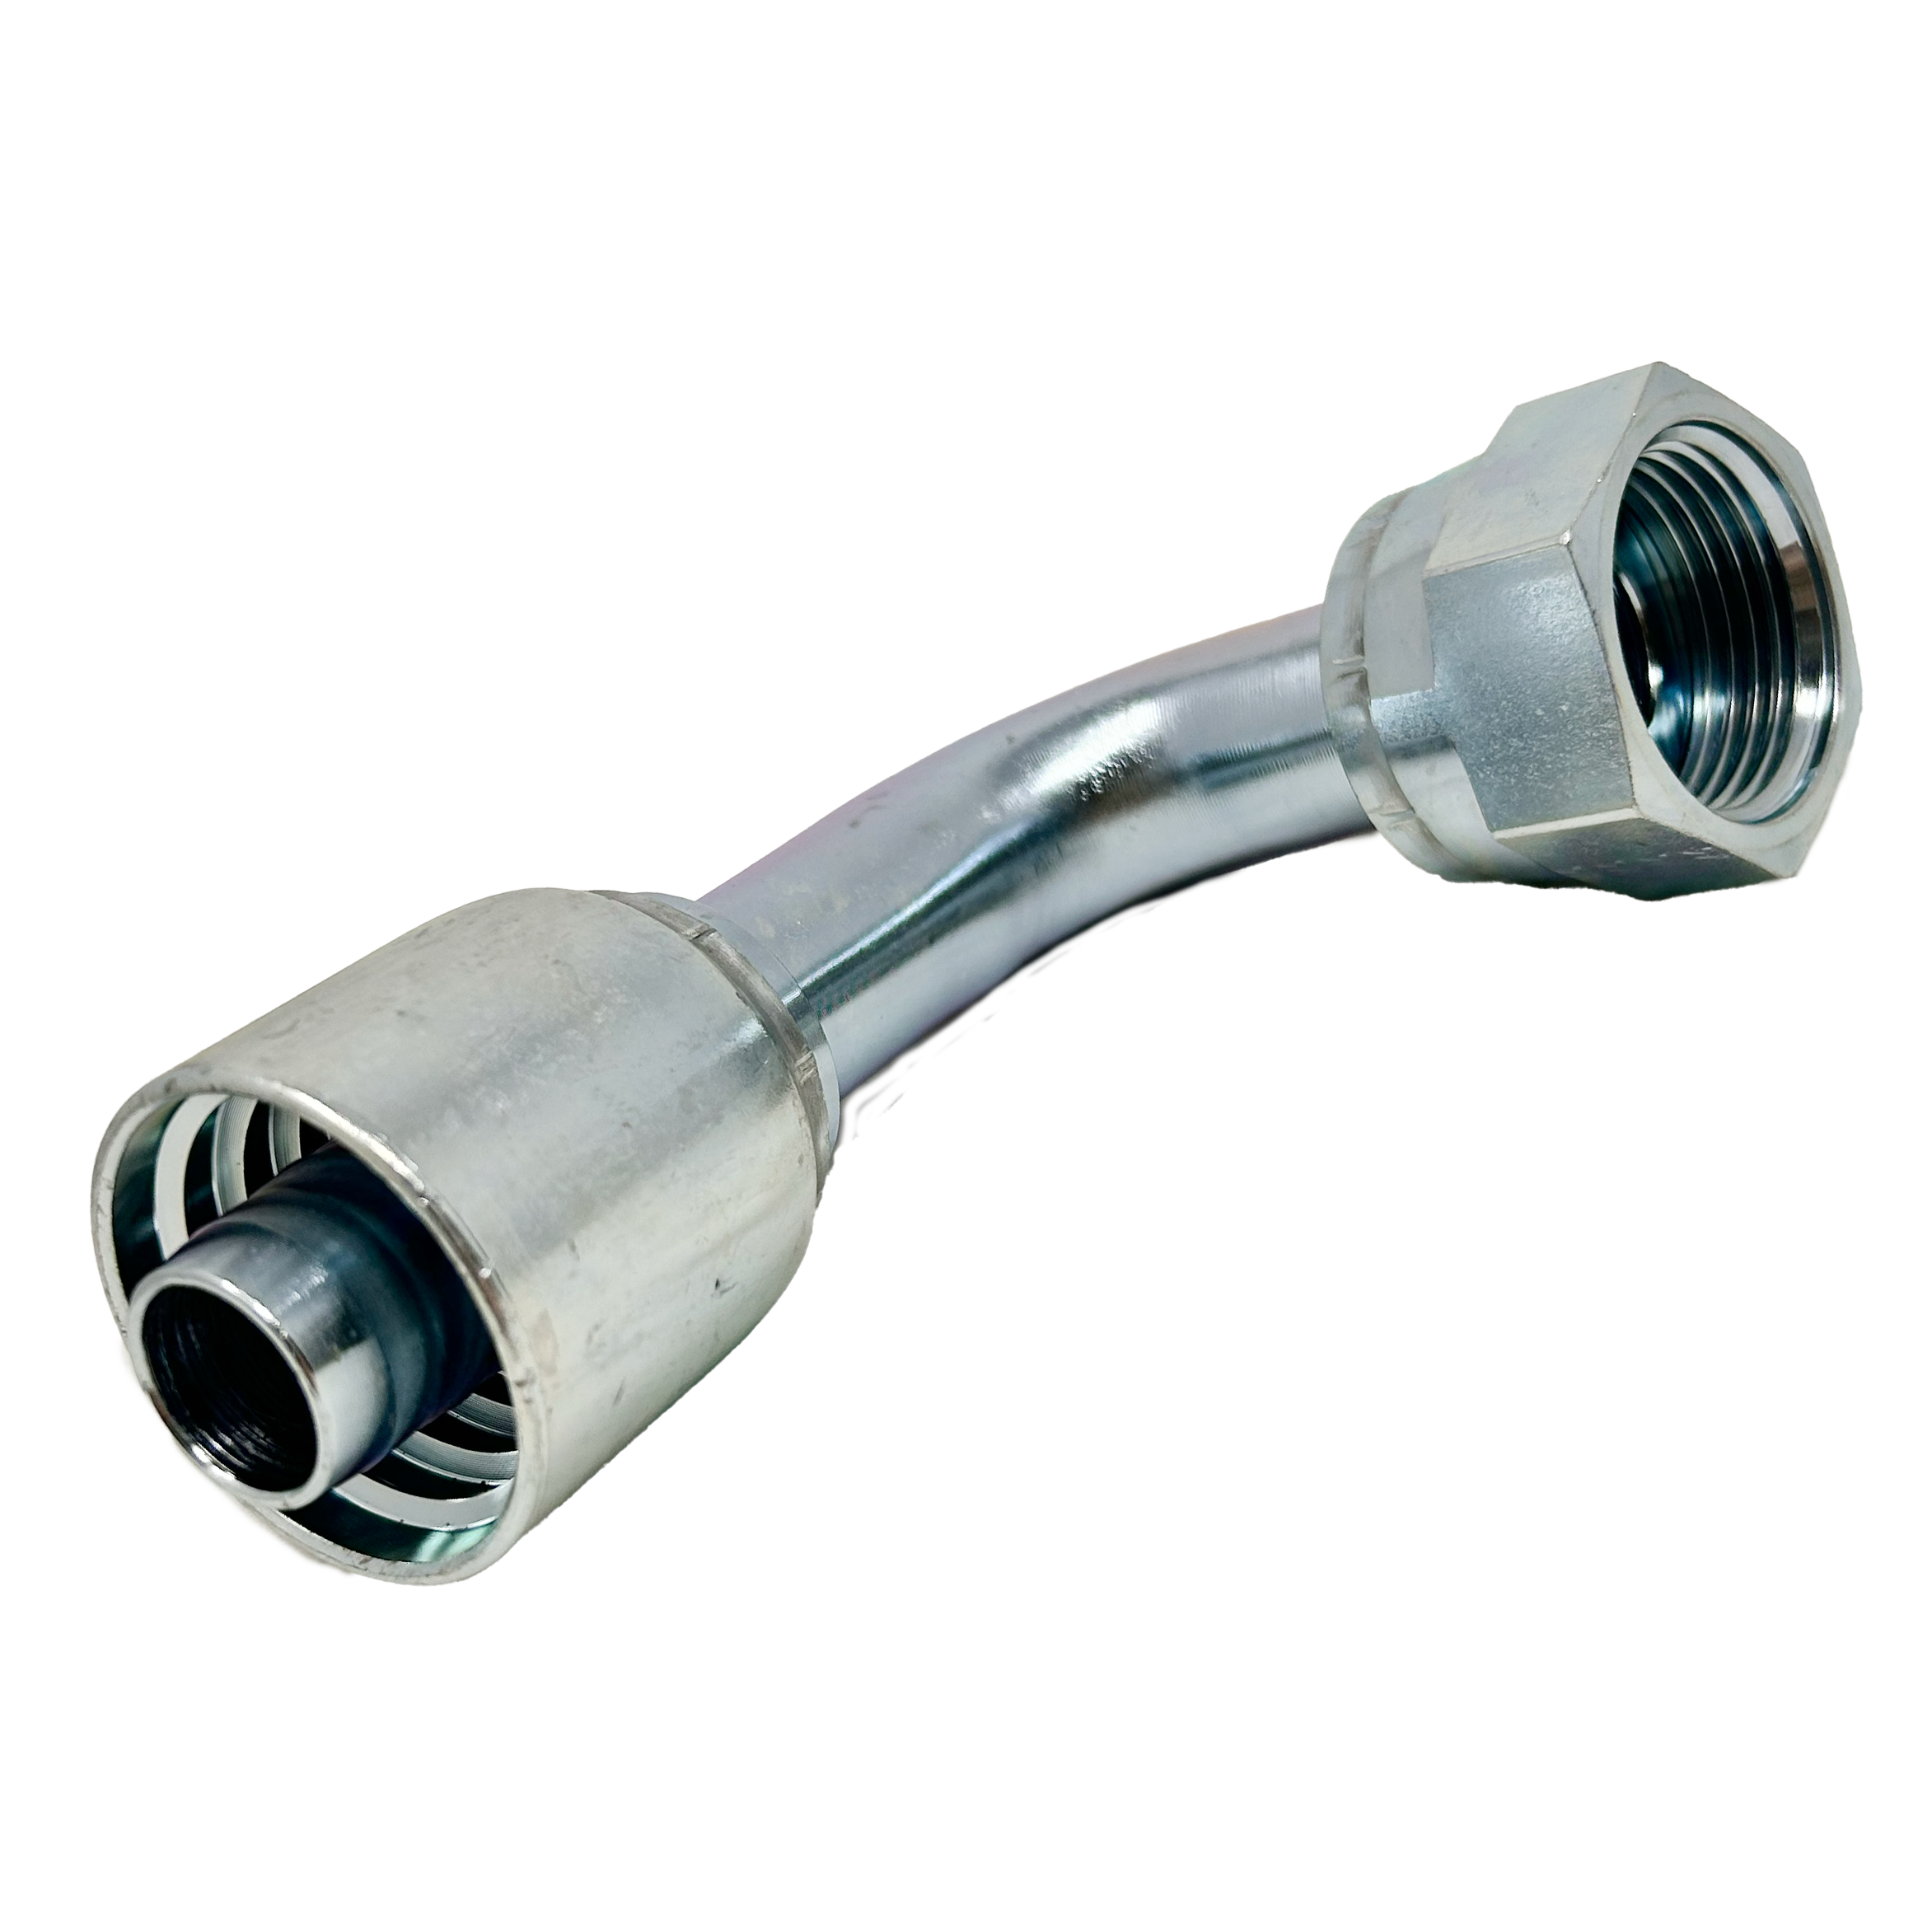 B2-OFFX90-1212: Continental Hose Fitting, 0.75 (3/4") Hose ID x 1-3/16-12 Female ORFS, 90-Degree Swivel Connection